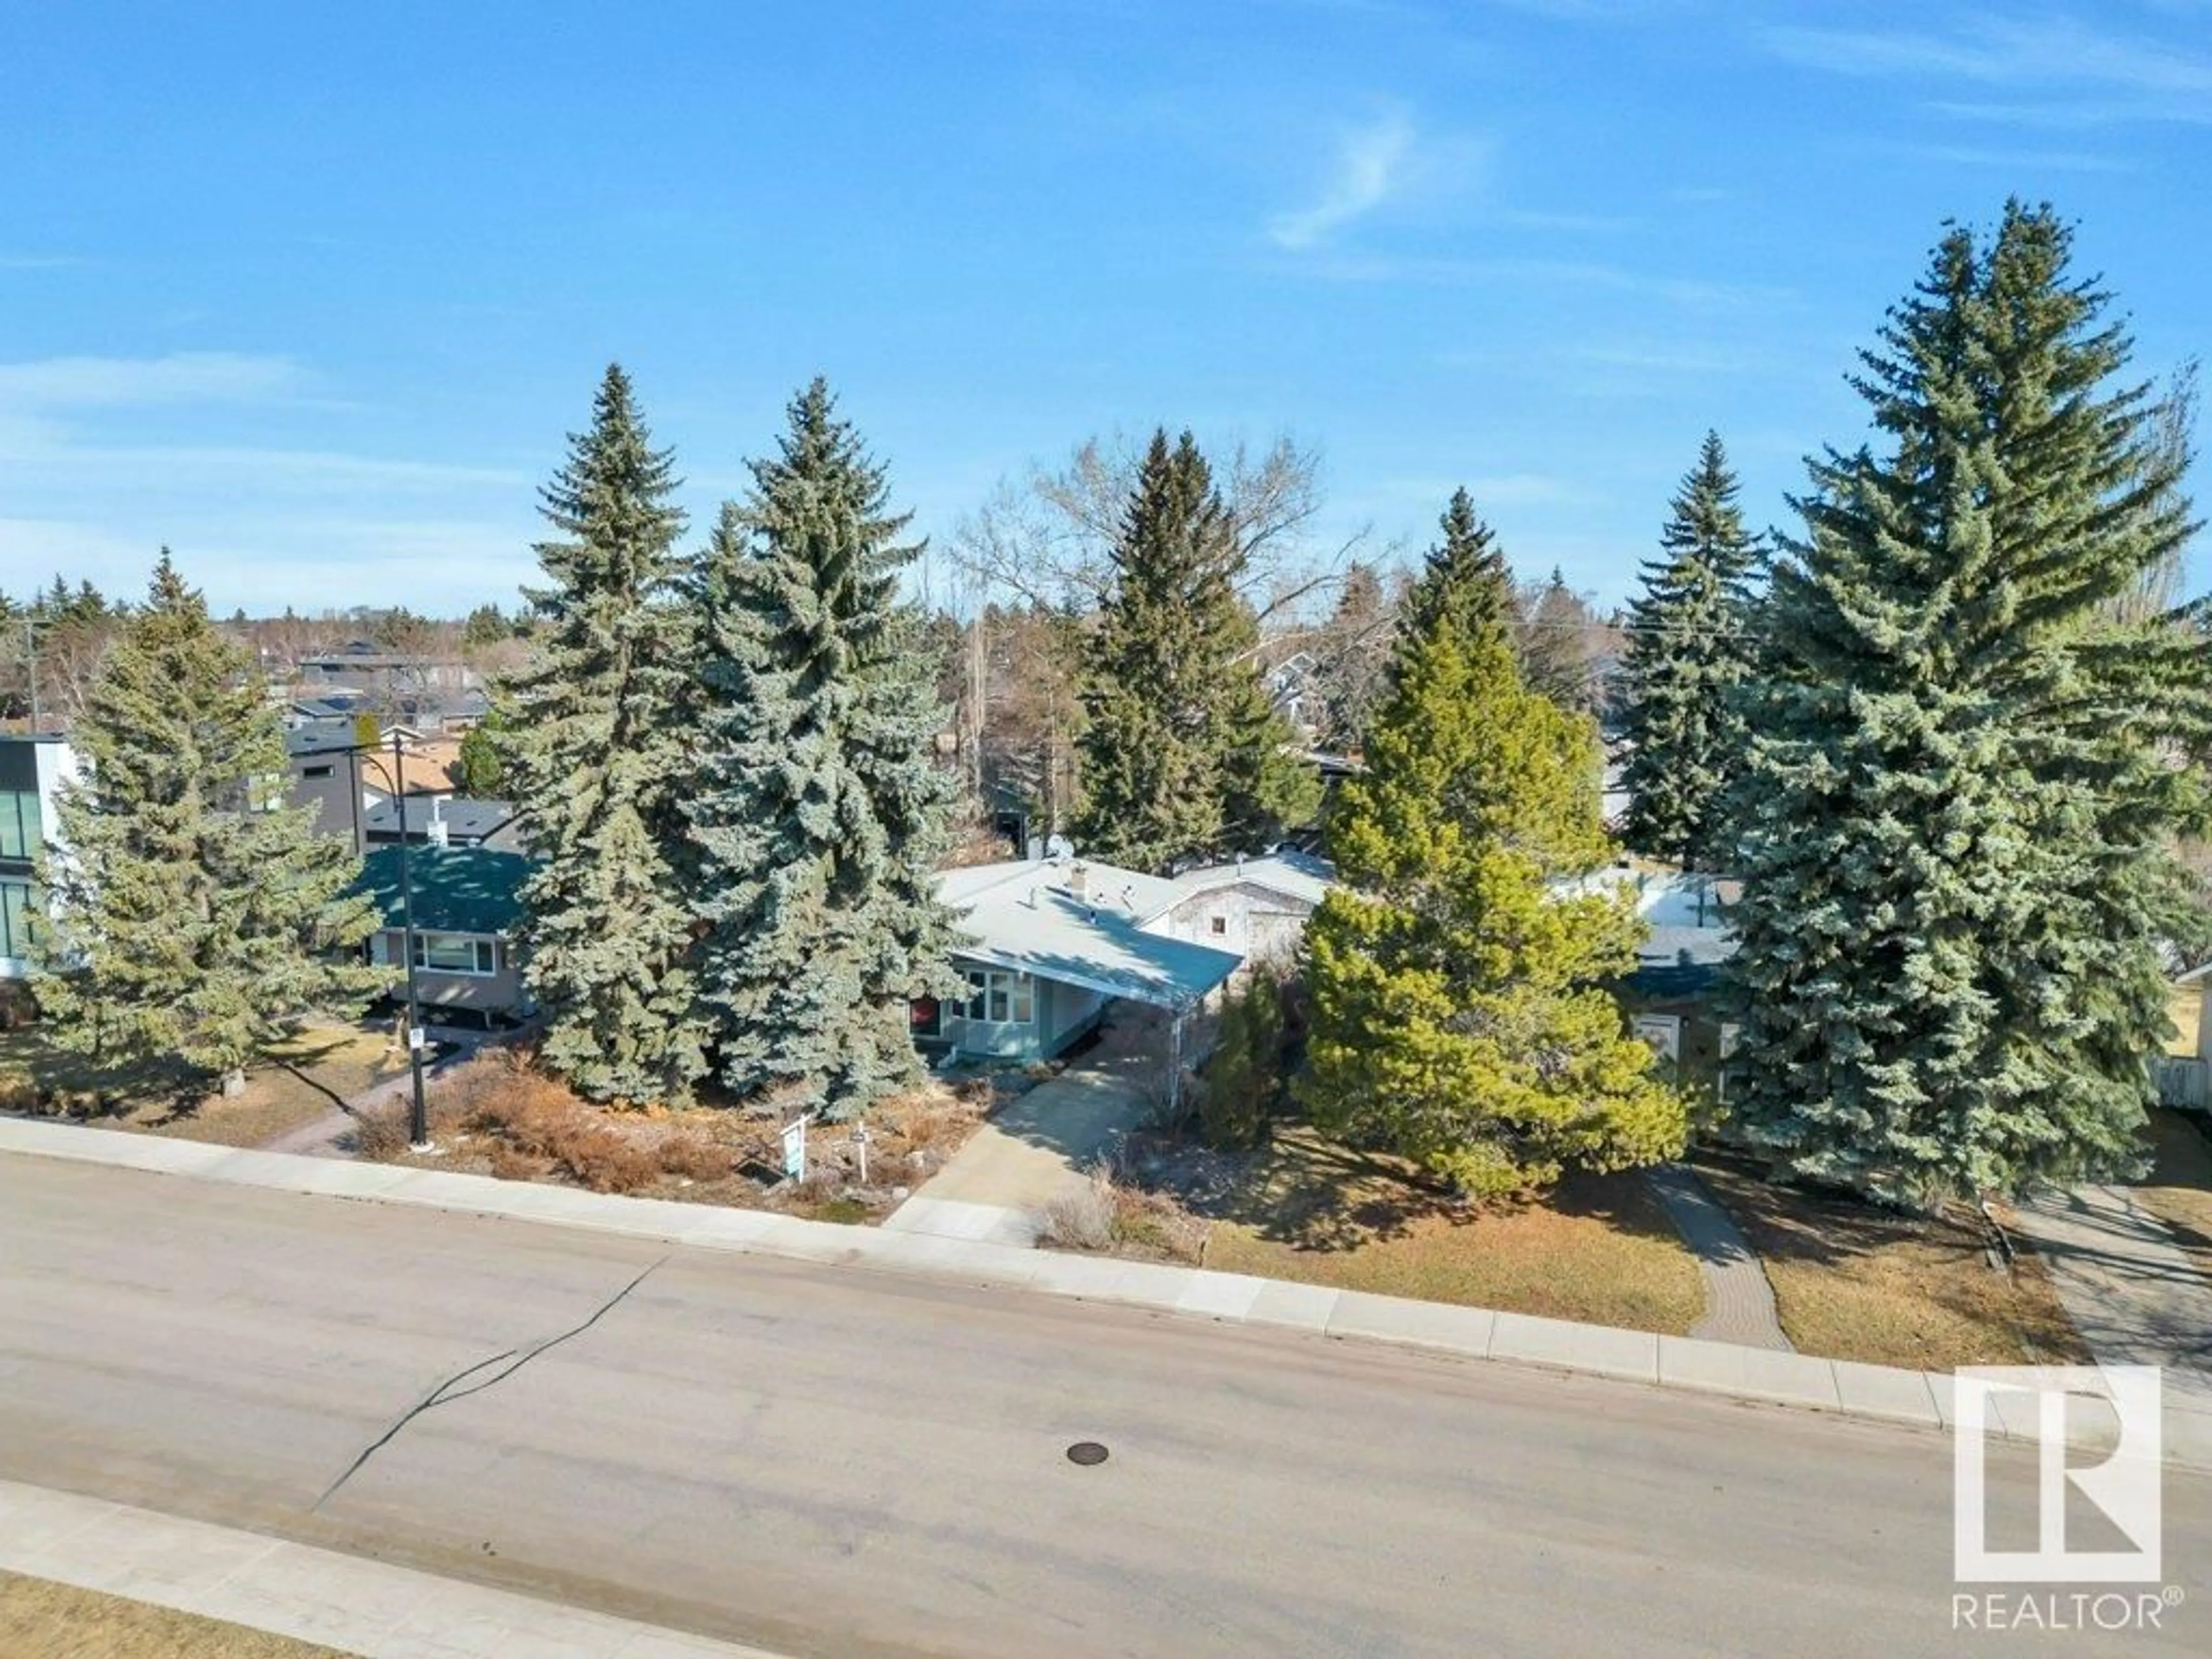 A pic from exterior of the house or condo for 14604 80 AV NW, Edmonton Alberta T5R3K6